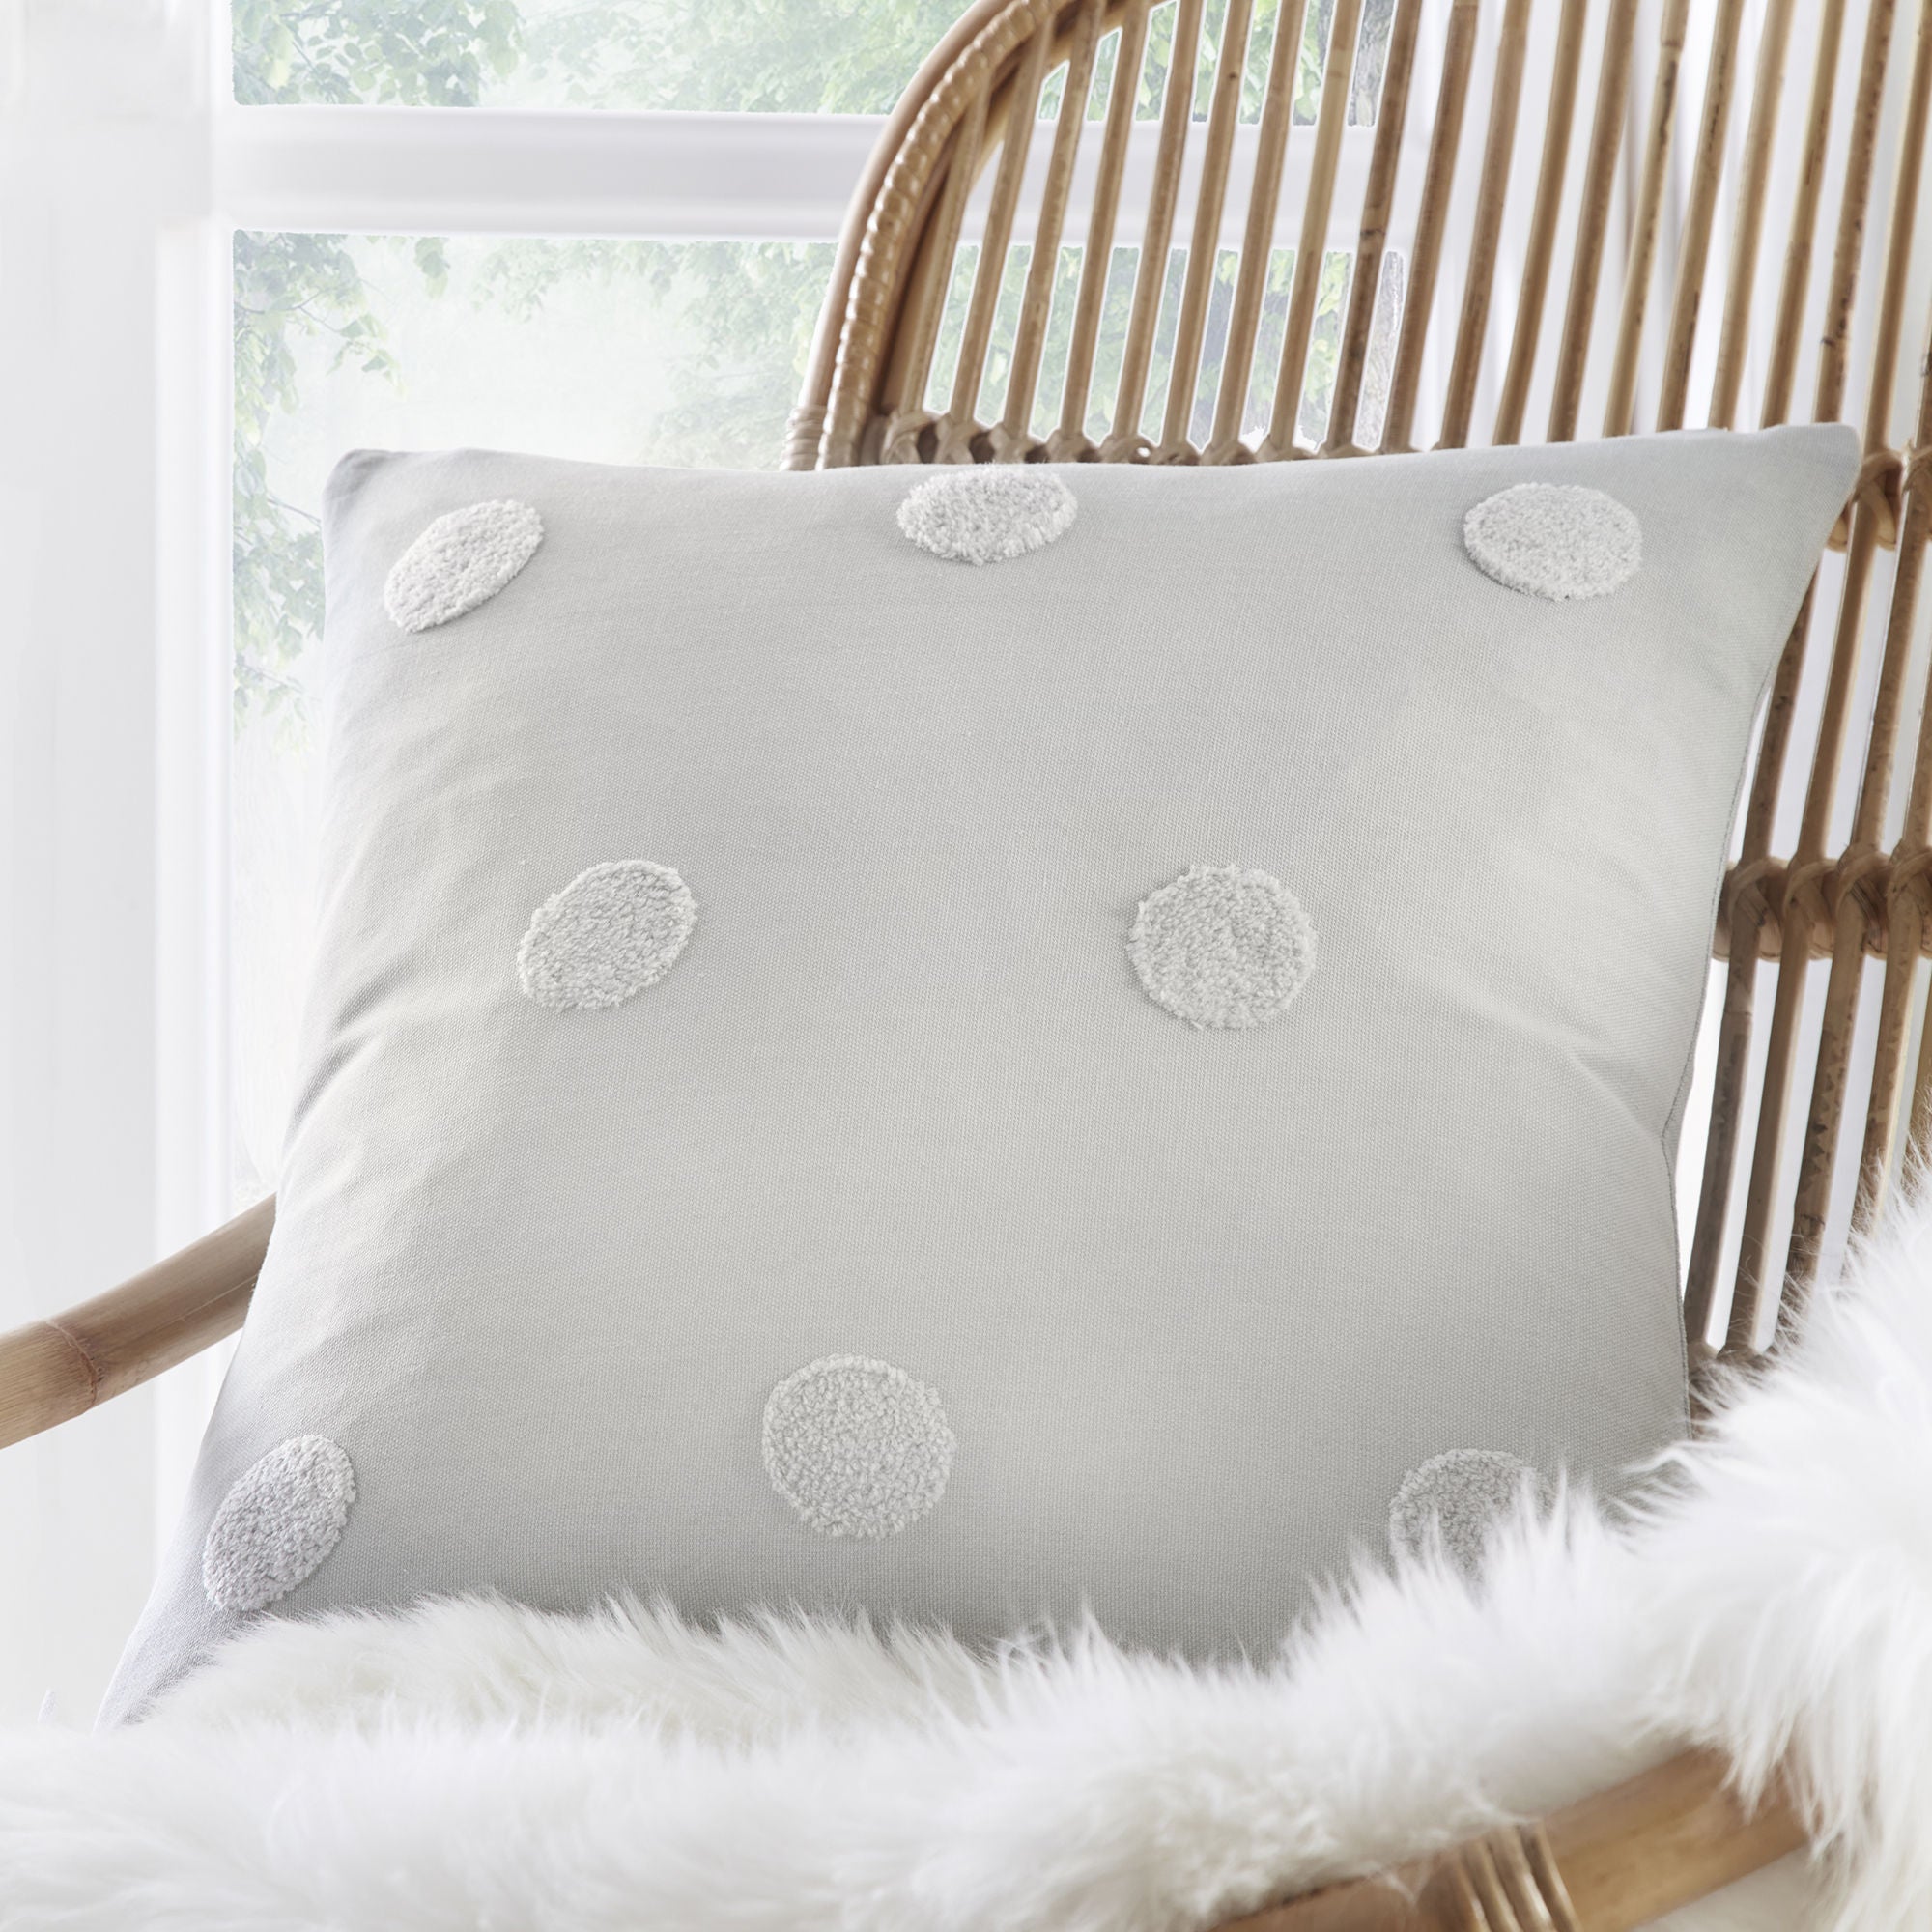 Zara Cushion by Appletree Boutique in Silver with Silver Dots 43 x 43cm - Cushion - Appletree Boutique